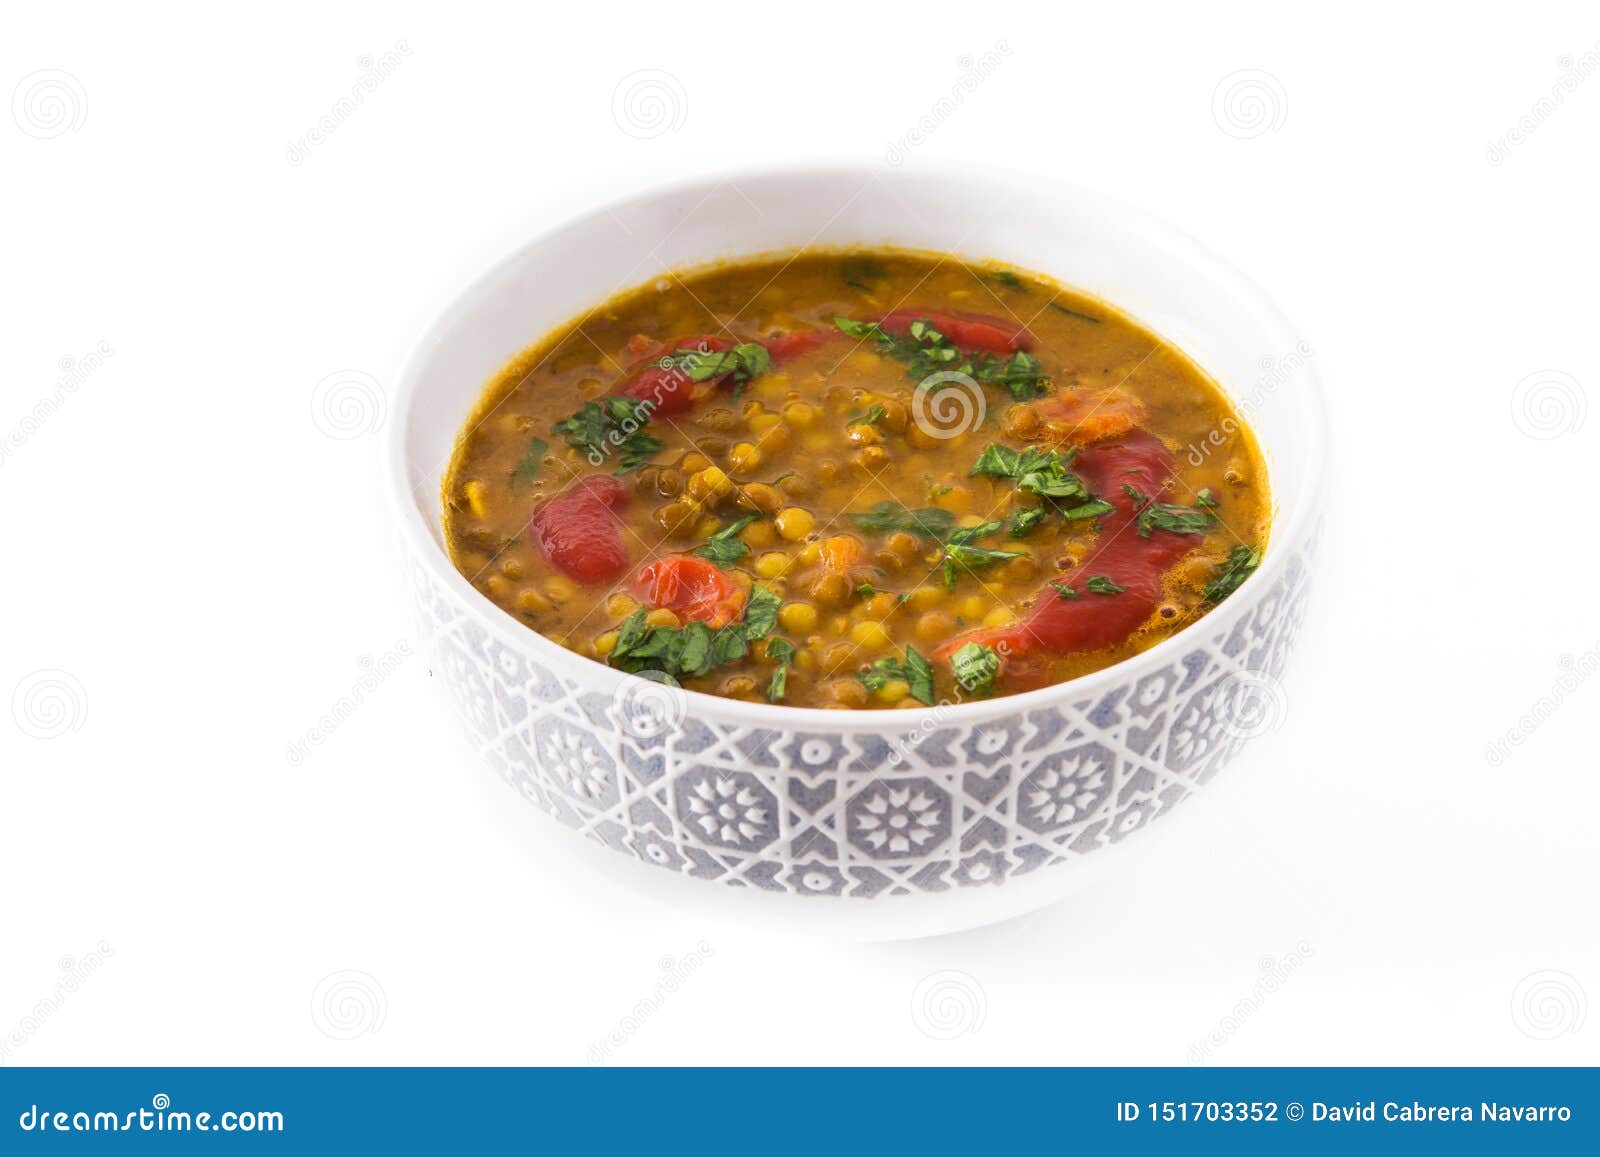 Indian Lentil Soup Dal Dhal In A Bowl Isolated Stock Photo - Image of ...